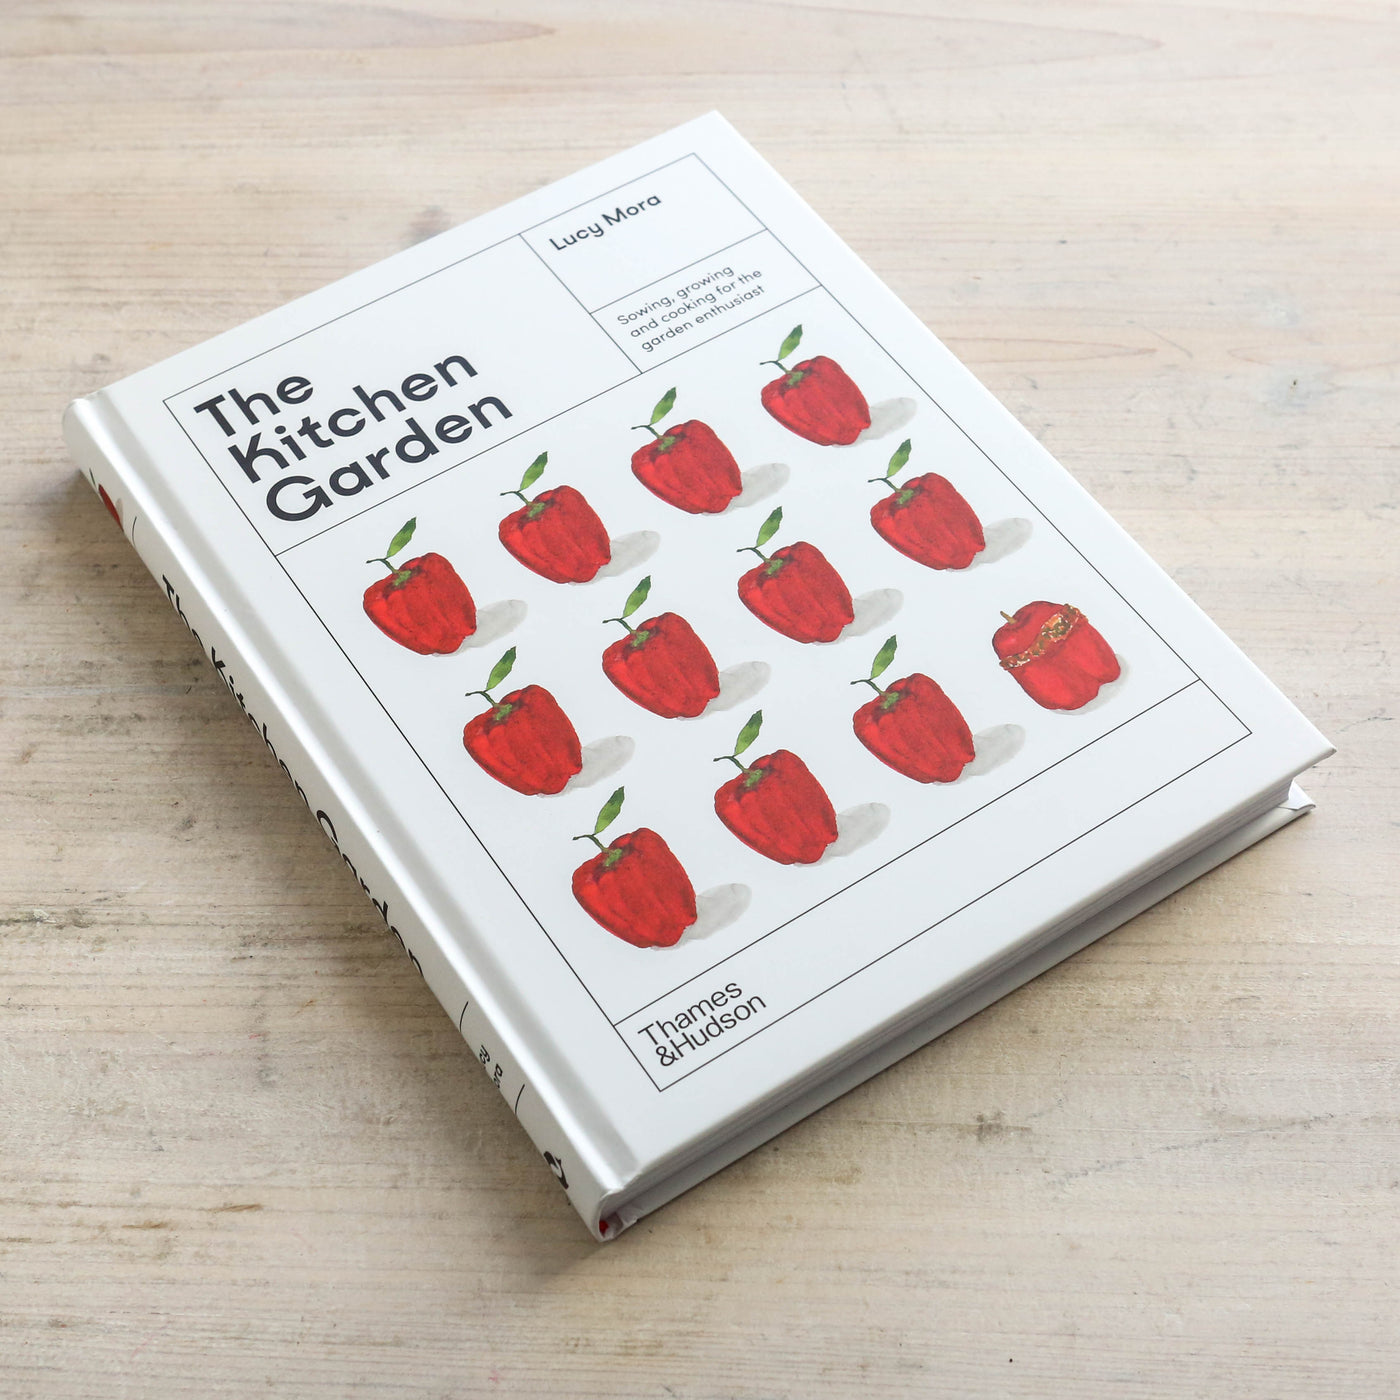 The Kitchen Garden : Sowing, growing and cooking for the garden enthusiast